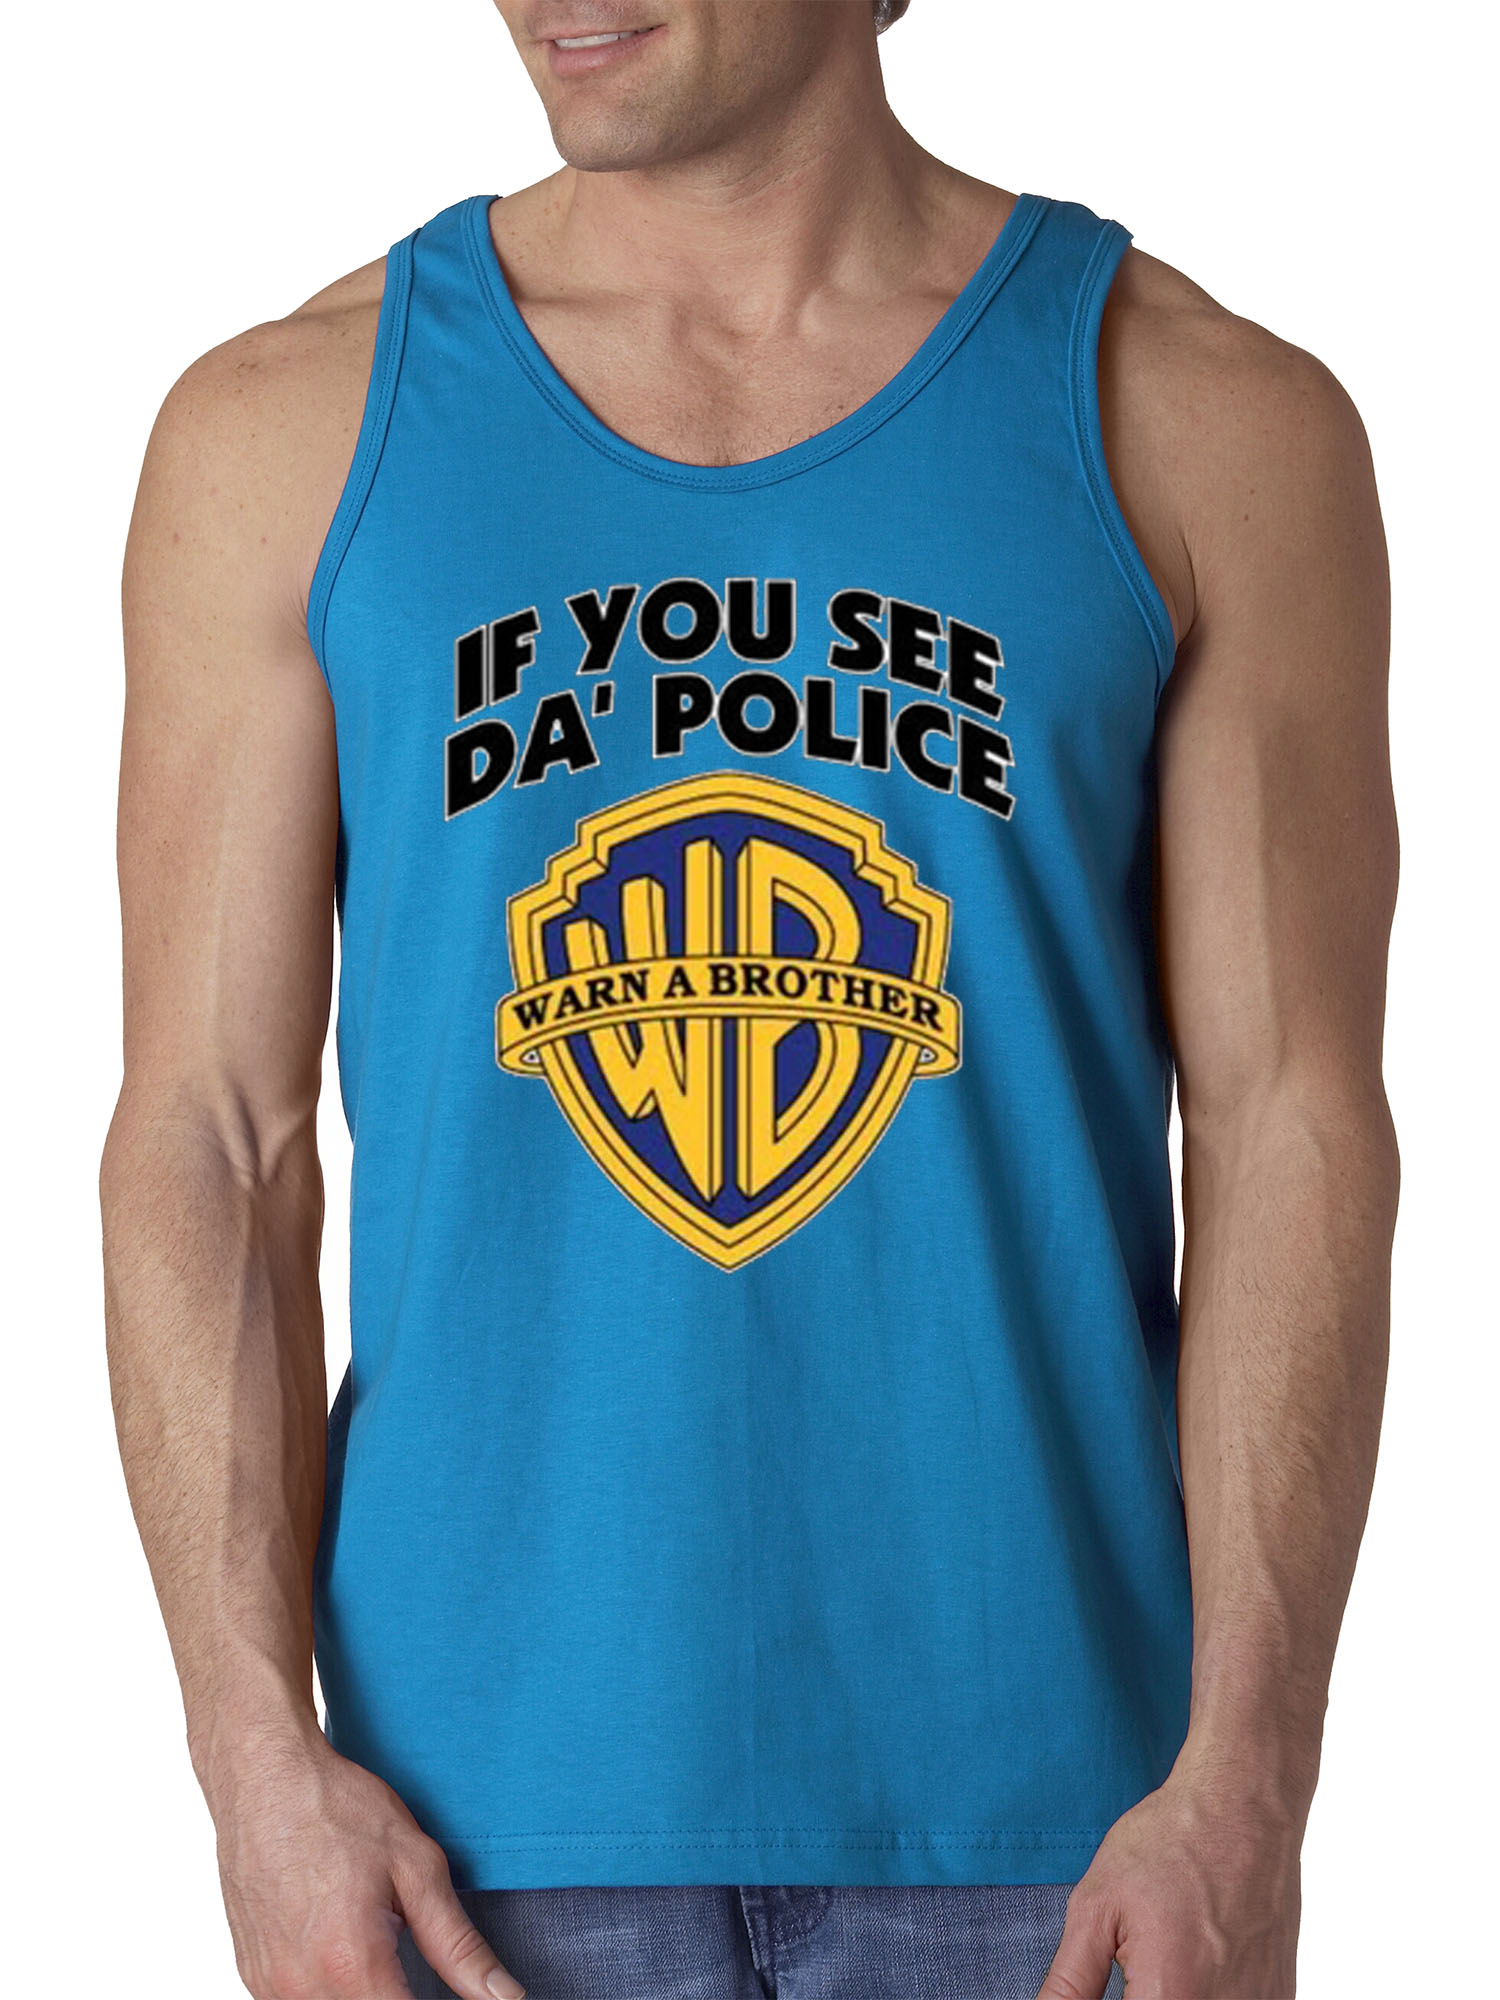 New Way 131 - Men's Tank-Top If You See Da Police Warn A Brother WB ...